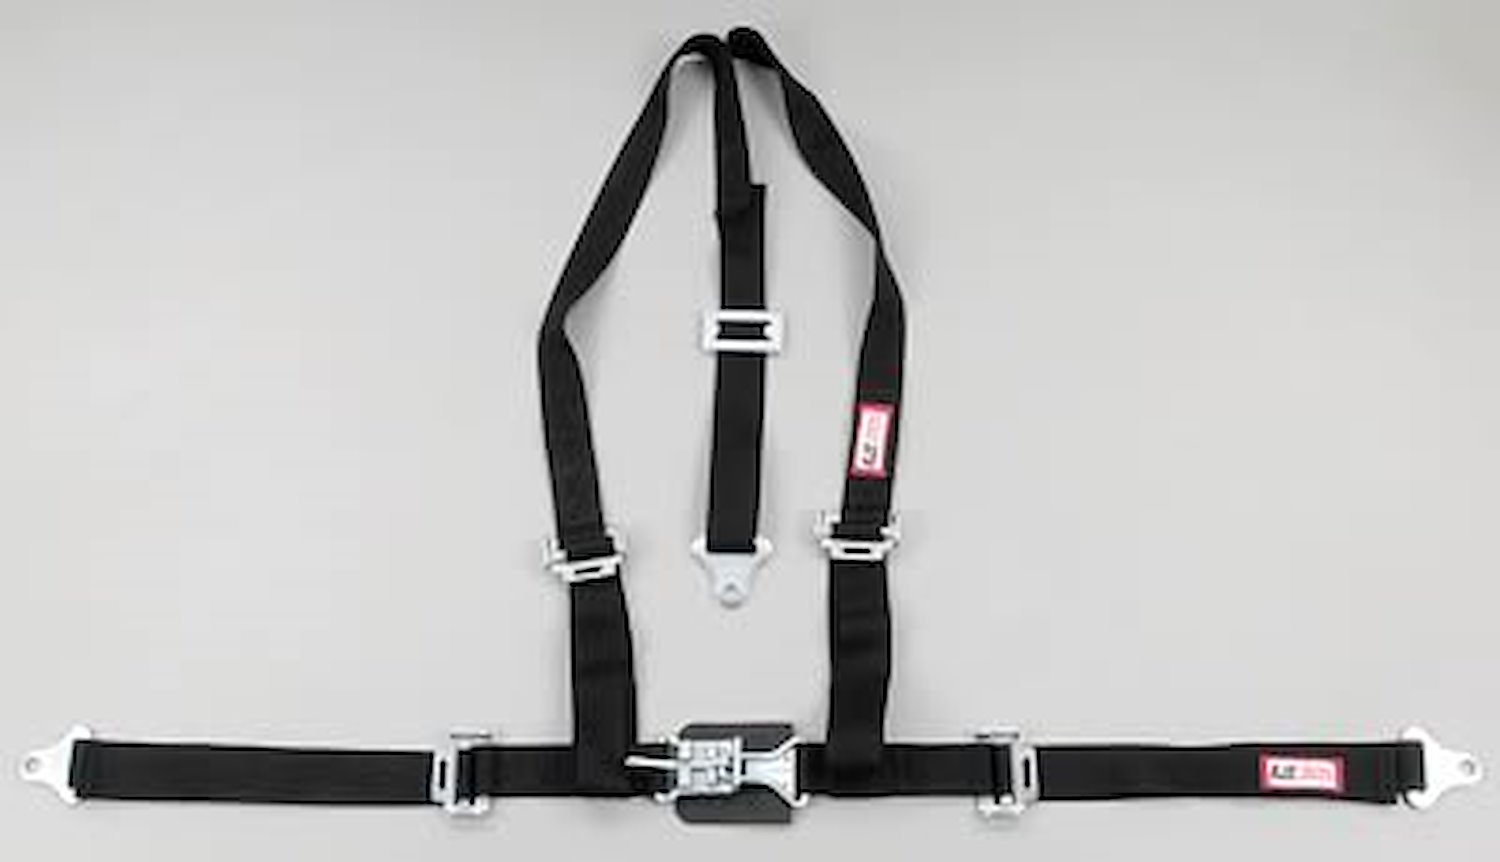 NON-SFI L&L HARNESS 2 PULL UP Lap Belt SNAP SEWN IN 2 S.H. Y FLOOR Mount WRAP/BOLT BLUE